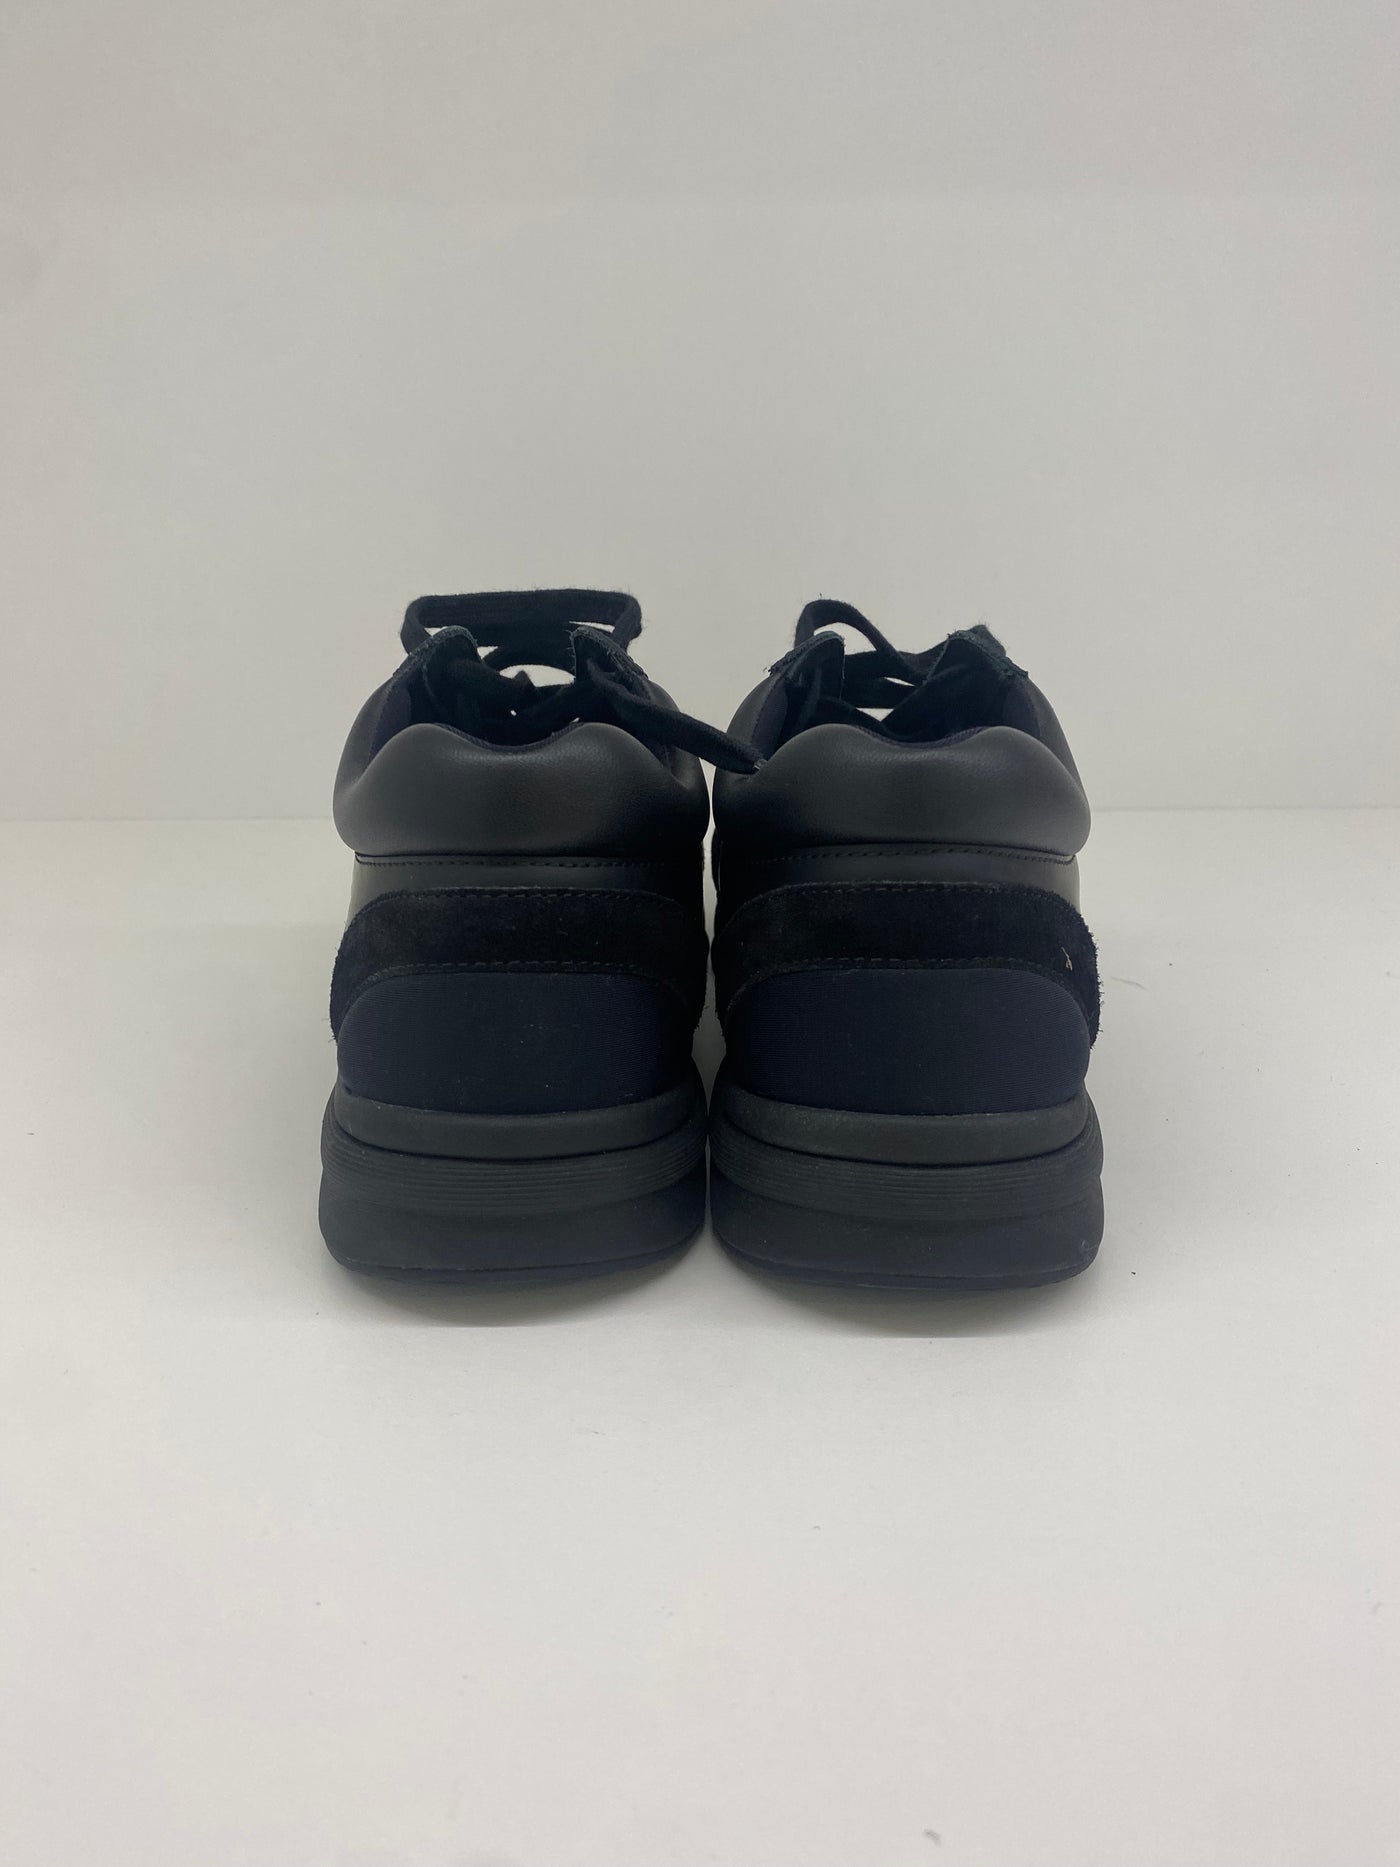 Chanel CC Black Sneakers - Size 41